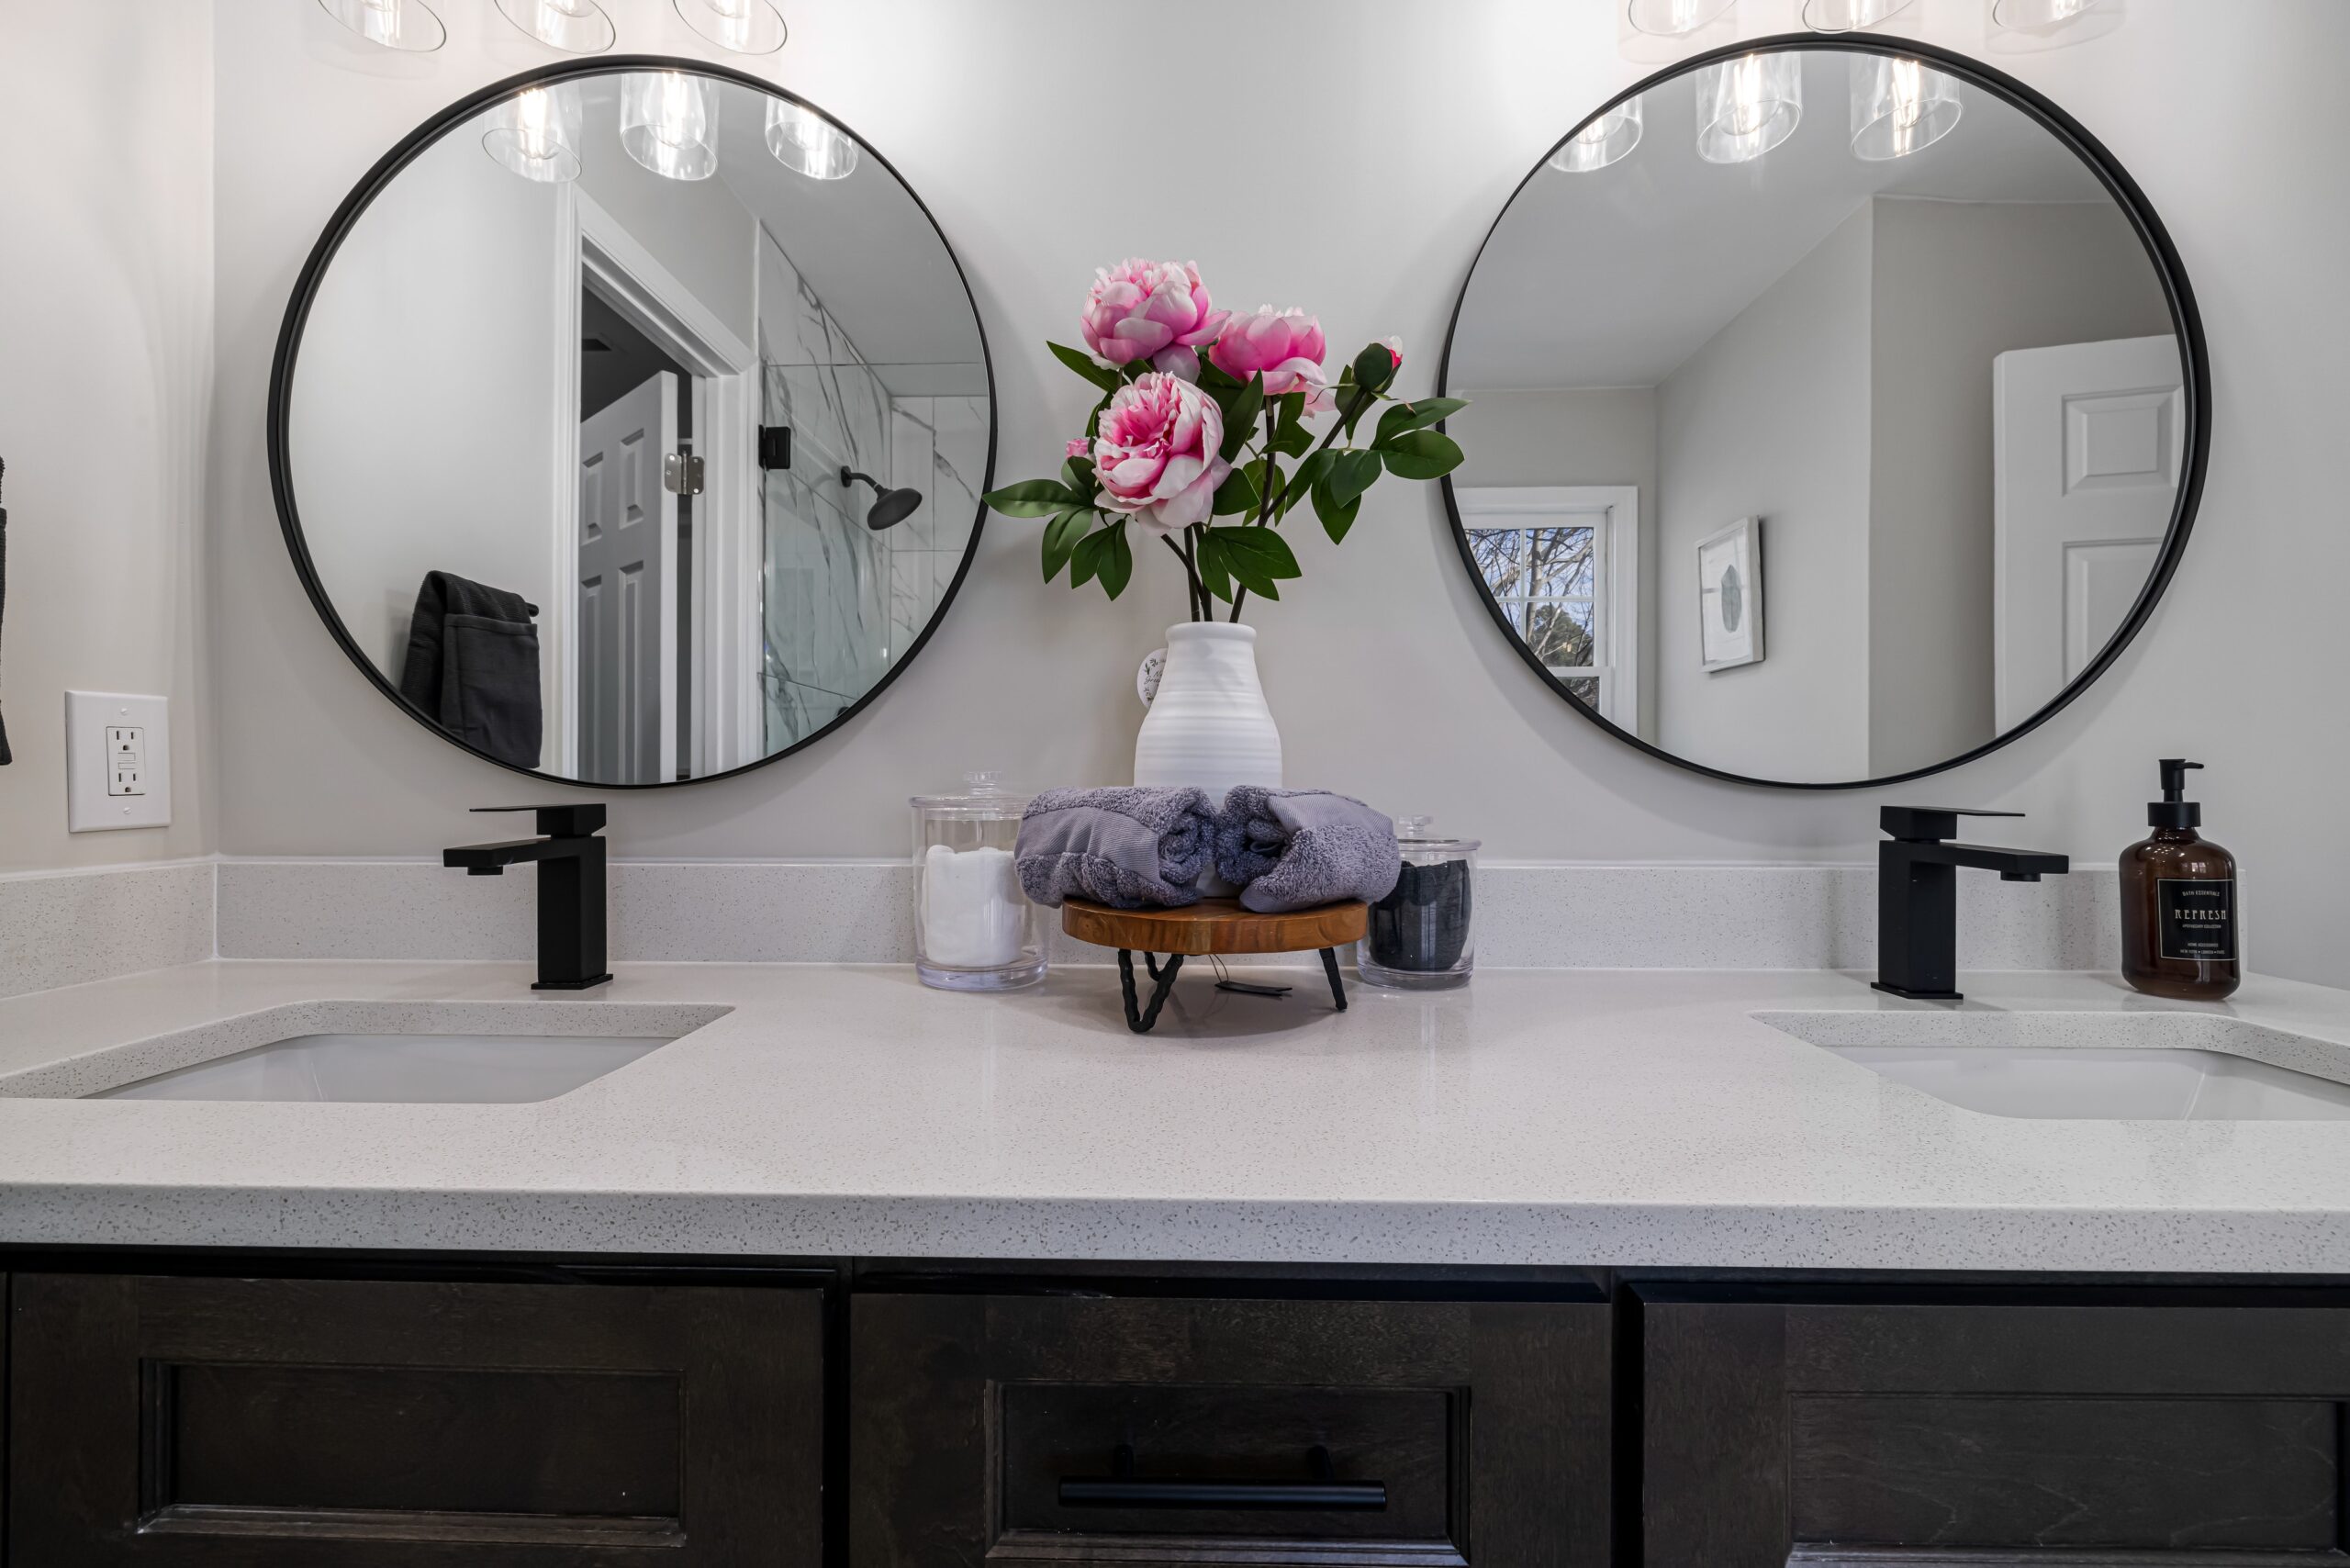 A bathroom with round mirrors, white sink and black faucets